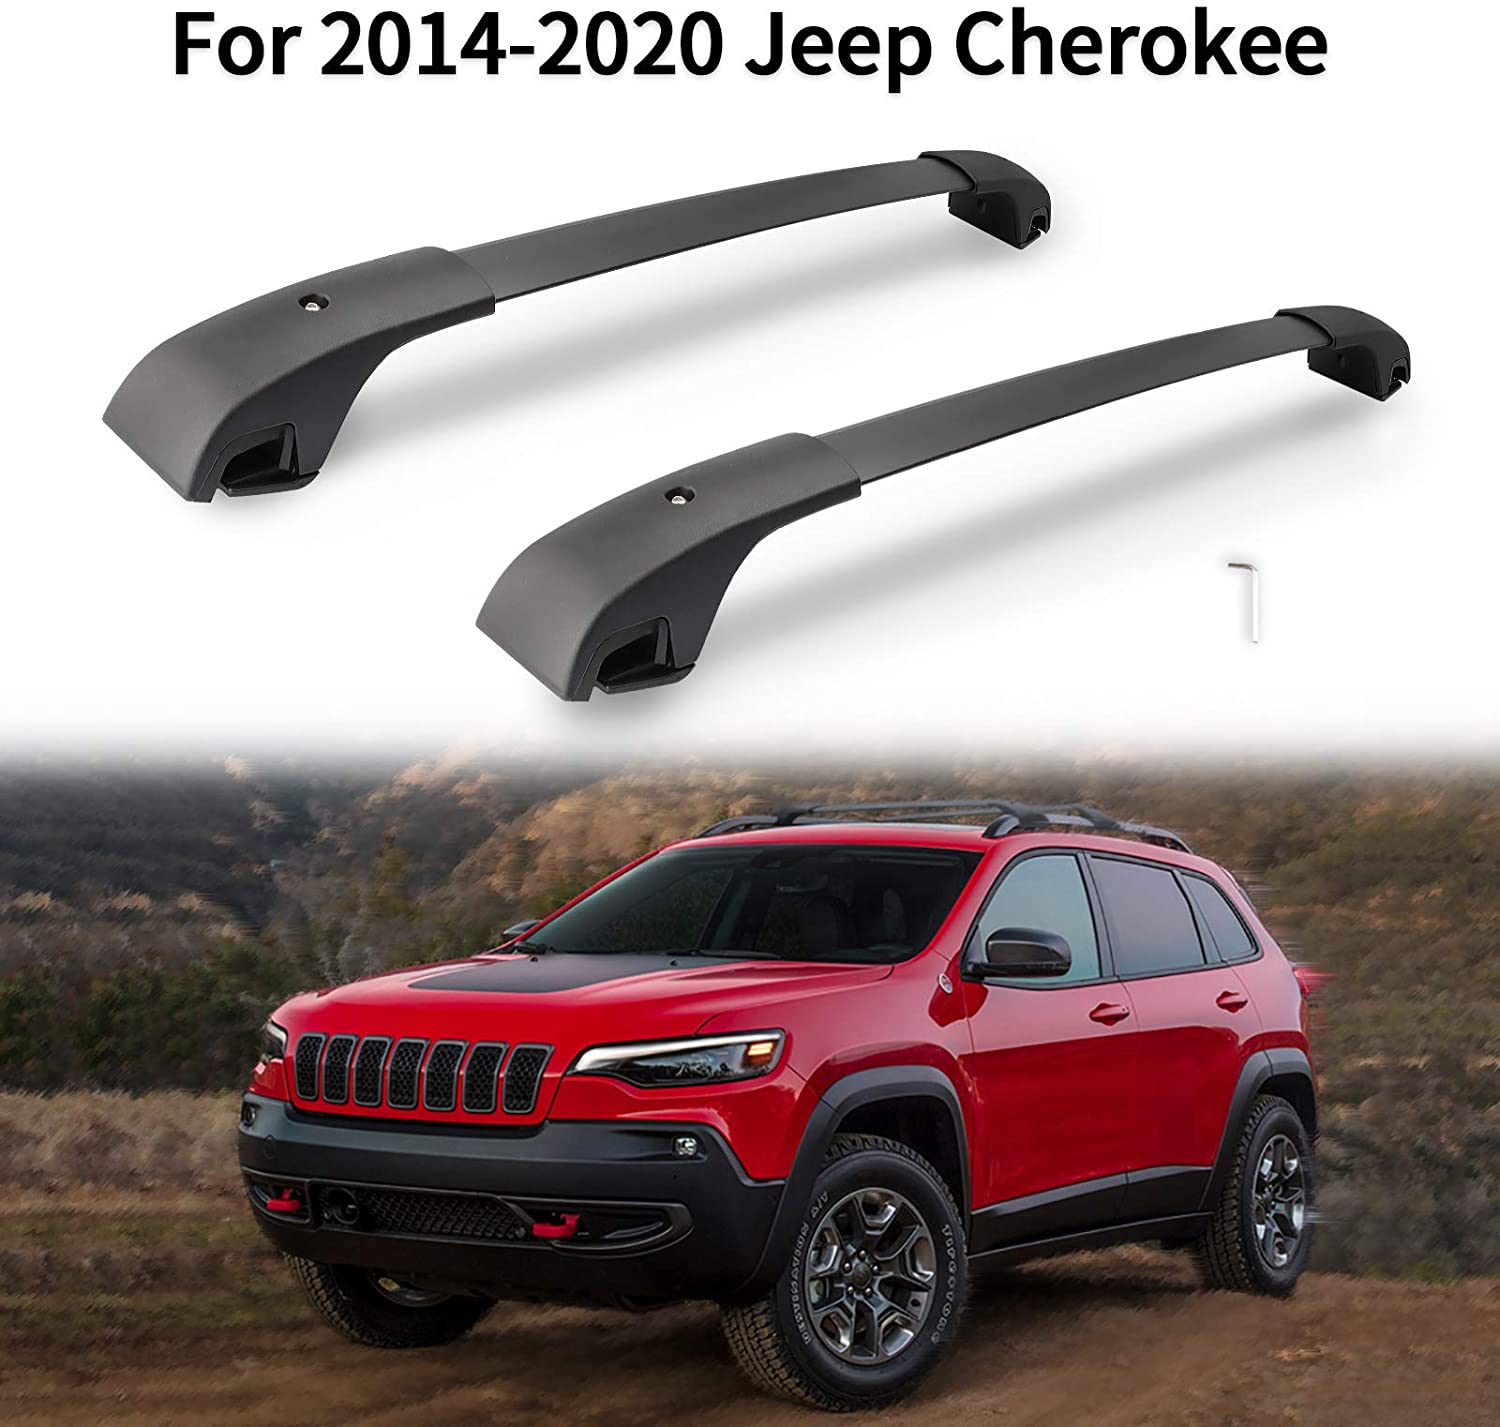 MONOKING Cross Bars Roof Rack Compatible with 2014-2020 Jeep Cherokee 2.4L 3.2L Aluminum ABS Cargo Carrier Kayak Rooftop Luggage Crossbar Max Load 155 LBS